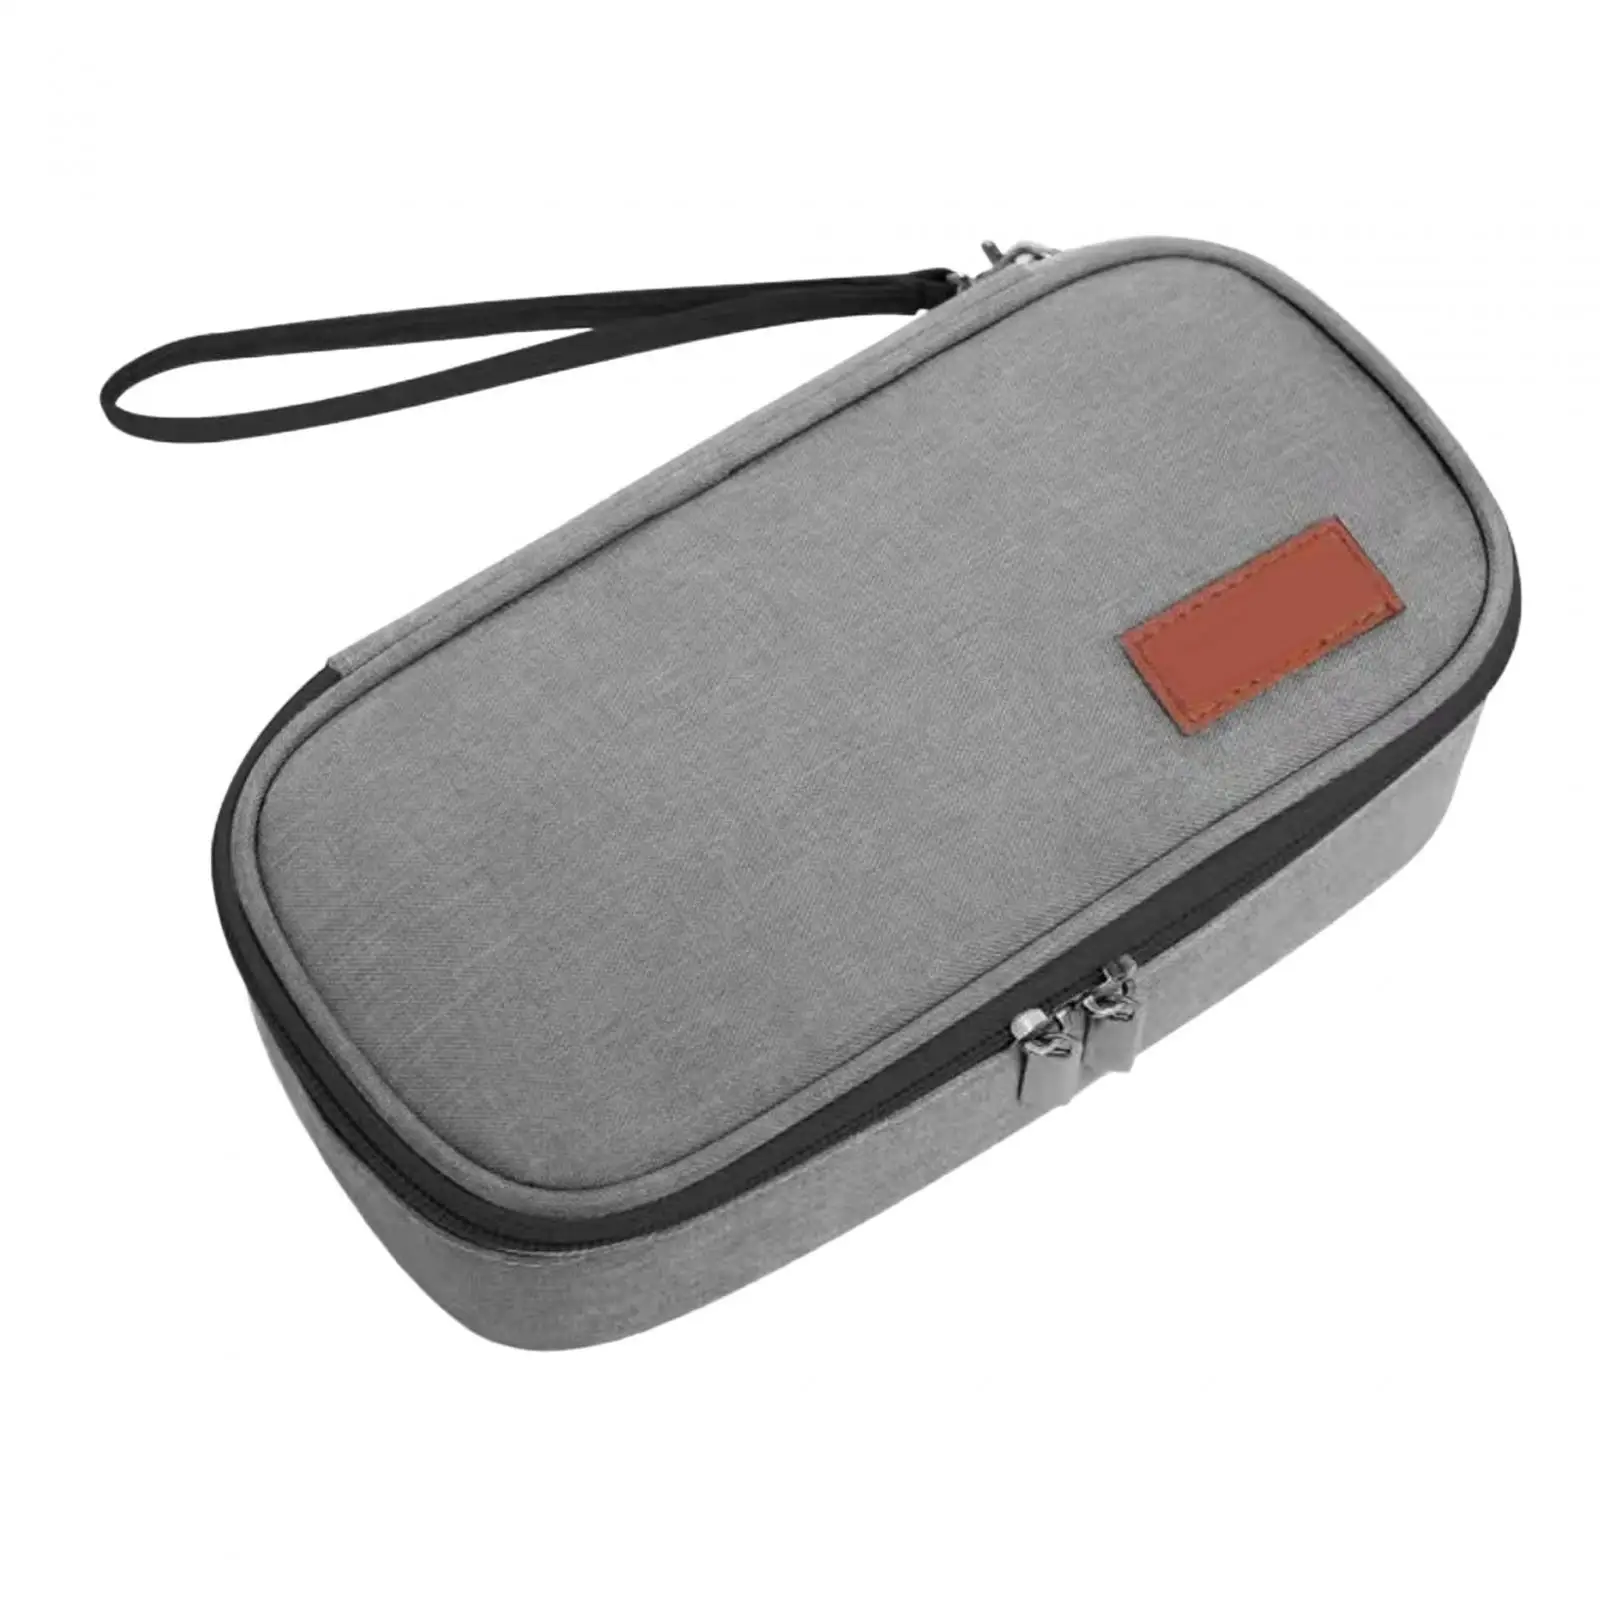 Cooler Travel Case Protective Aluminum Foil Keep Cool Insulated Carrying Case Waterproof for Home Office Outdoor Indoor